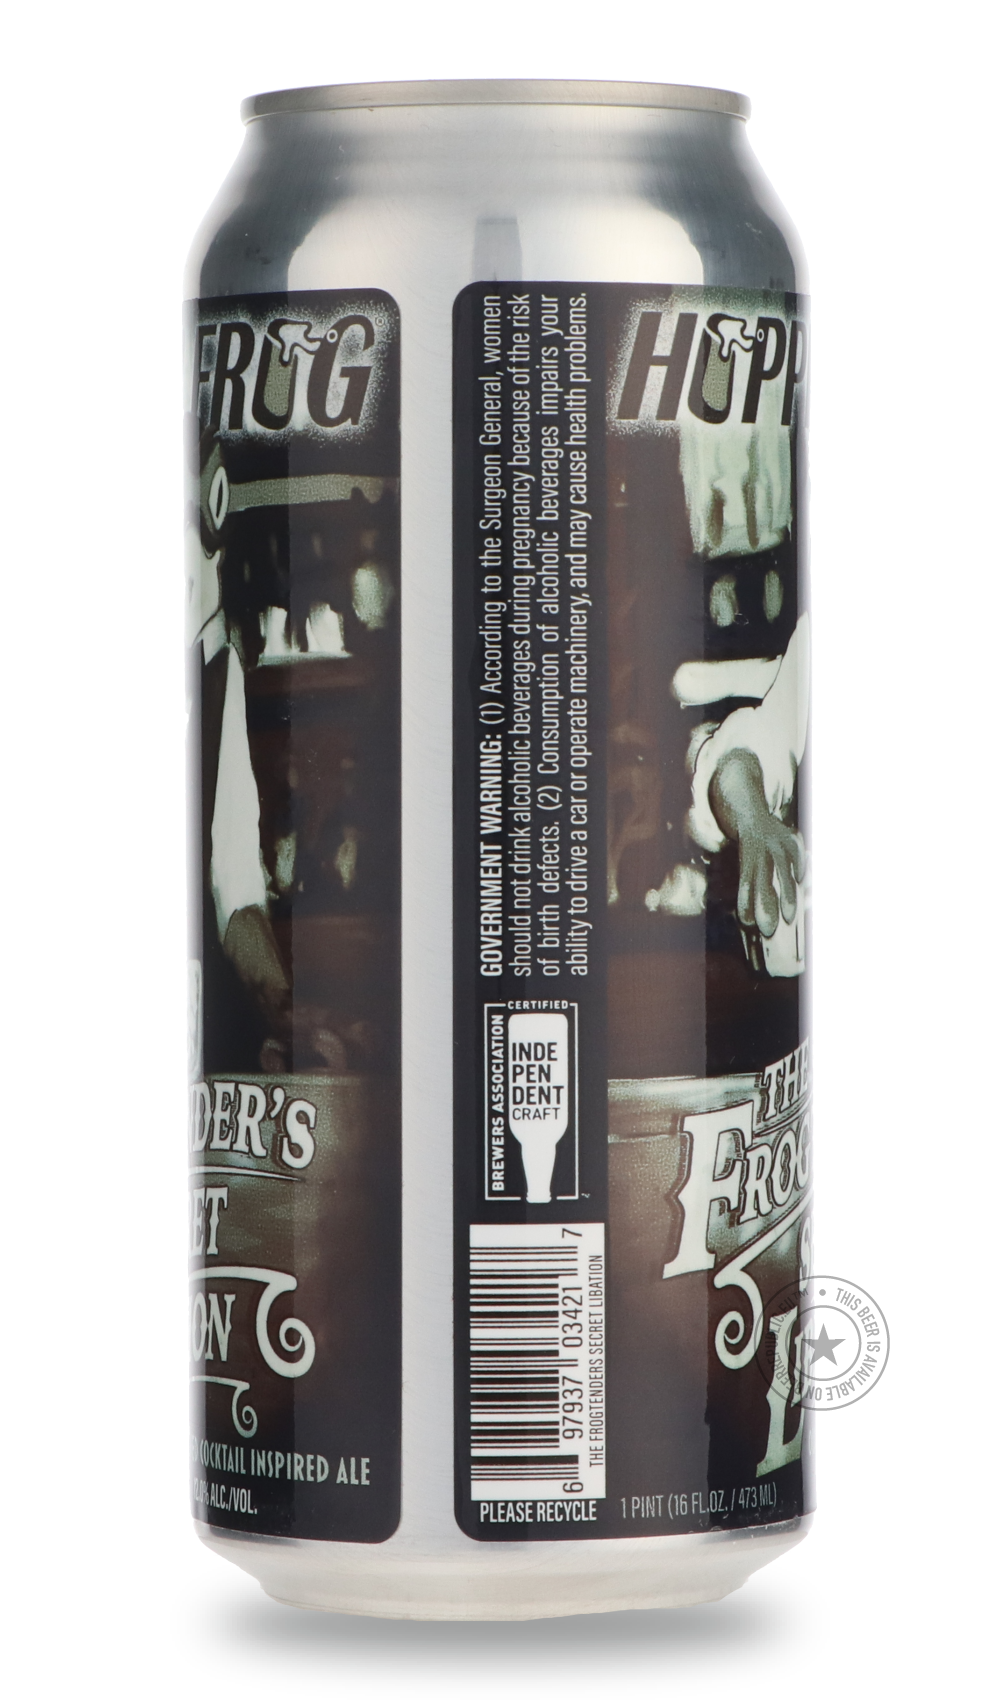 -Hoppin' Frog- The Frogtender's Secret Libation Old Fashioned Cocktail Inspired Ale-Brown & Dark- Only @ Beer Republic - The best online beer store for American & Canadian craft beer - Buy beer online from the USA and Canada - Bier online kopen - Amerikaans bier kopen - Craft beer store - Craft beer kopen - Amerikanisch bier kaufen - Bier online kaufen - Acheter biere online - IPA - Stout - Porter - New England IPA - Hazy IPA - Imperial Stout - Barrel Aged - Barrel Aged Imperial Stout - Brown - Dark beer - 